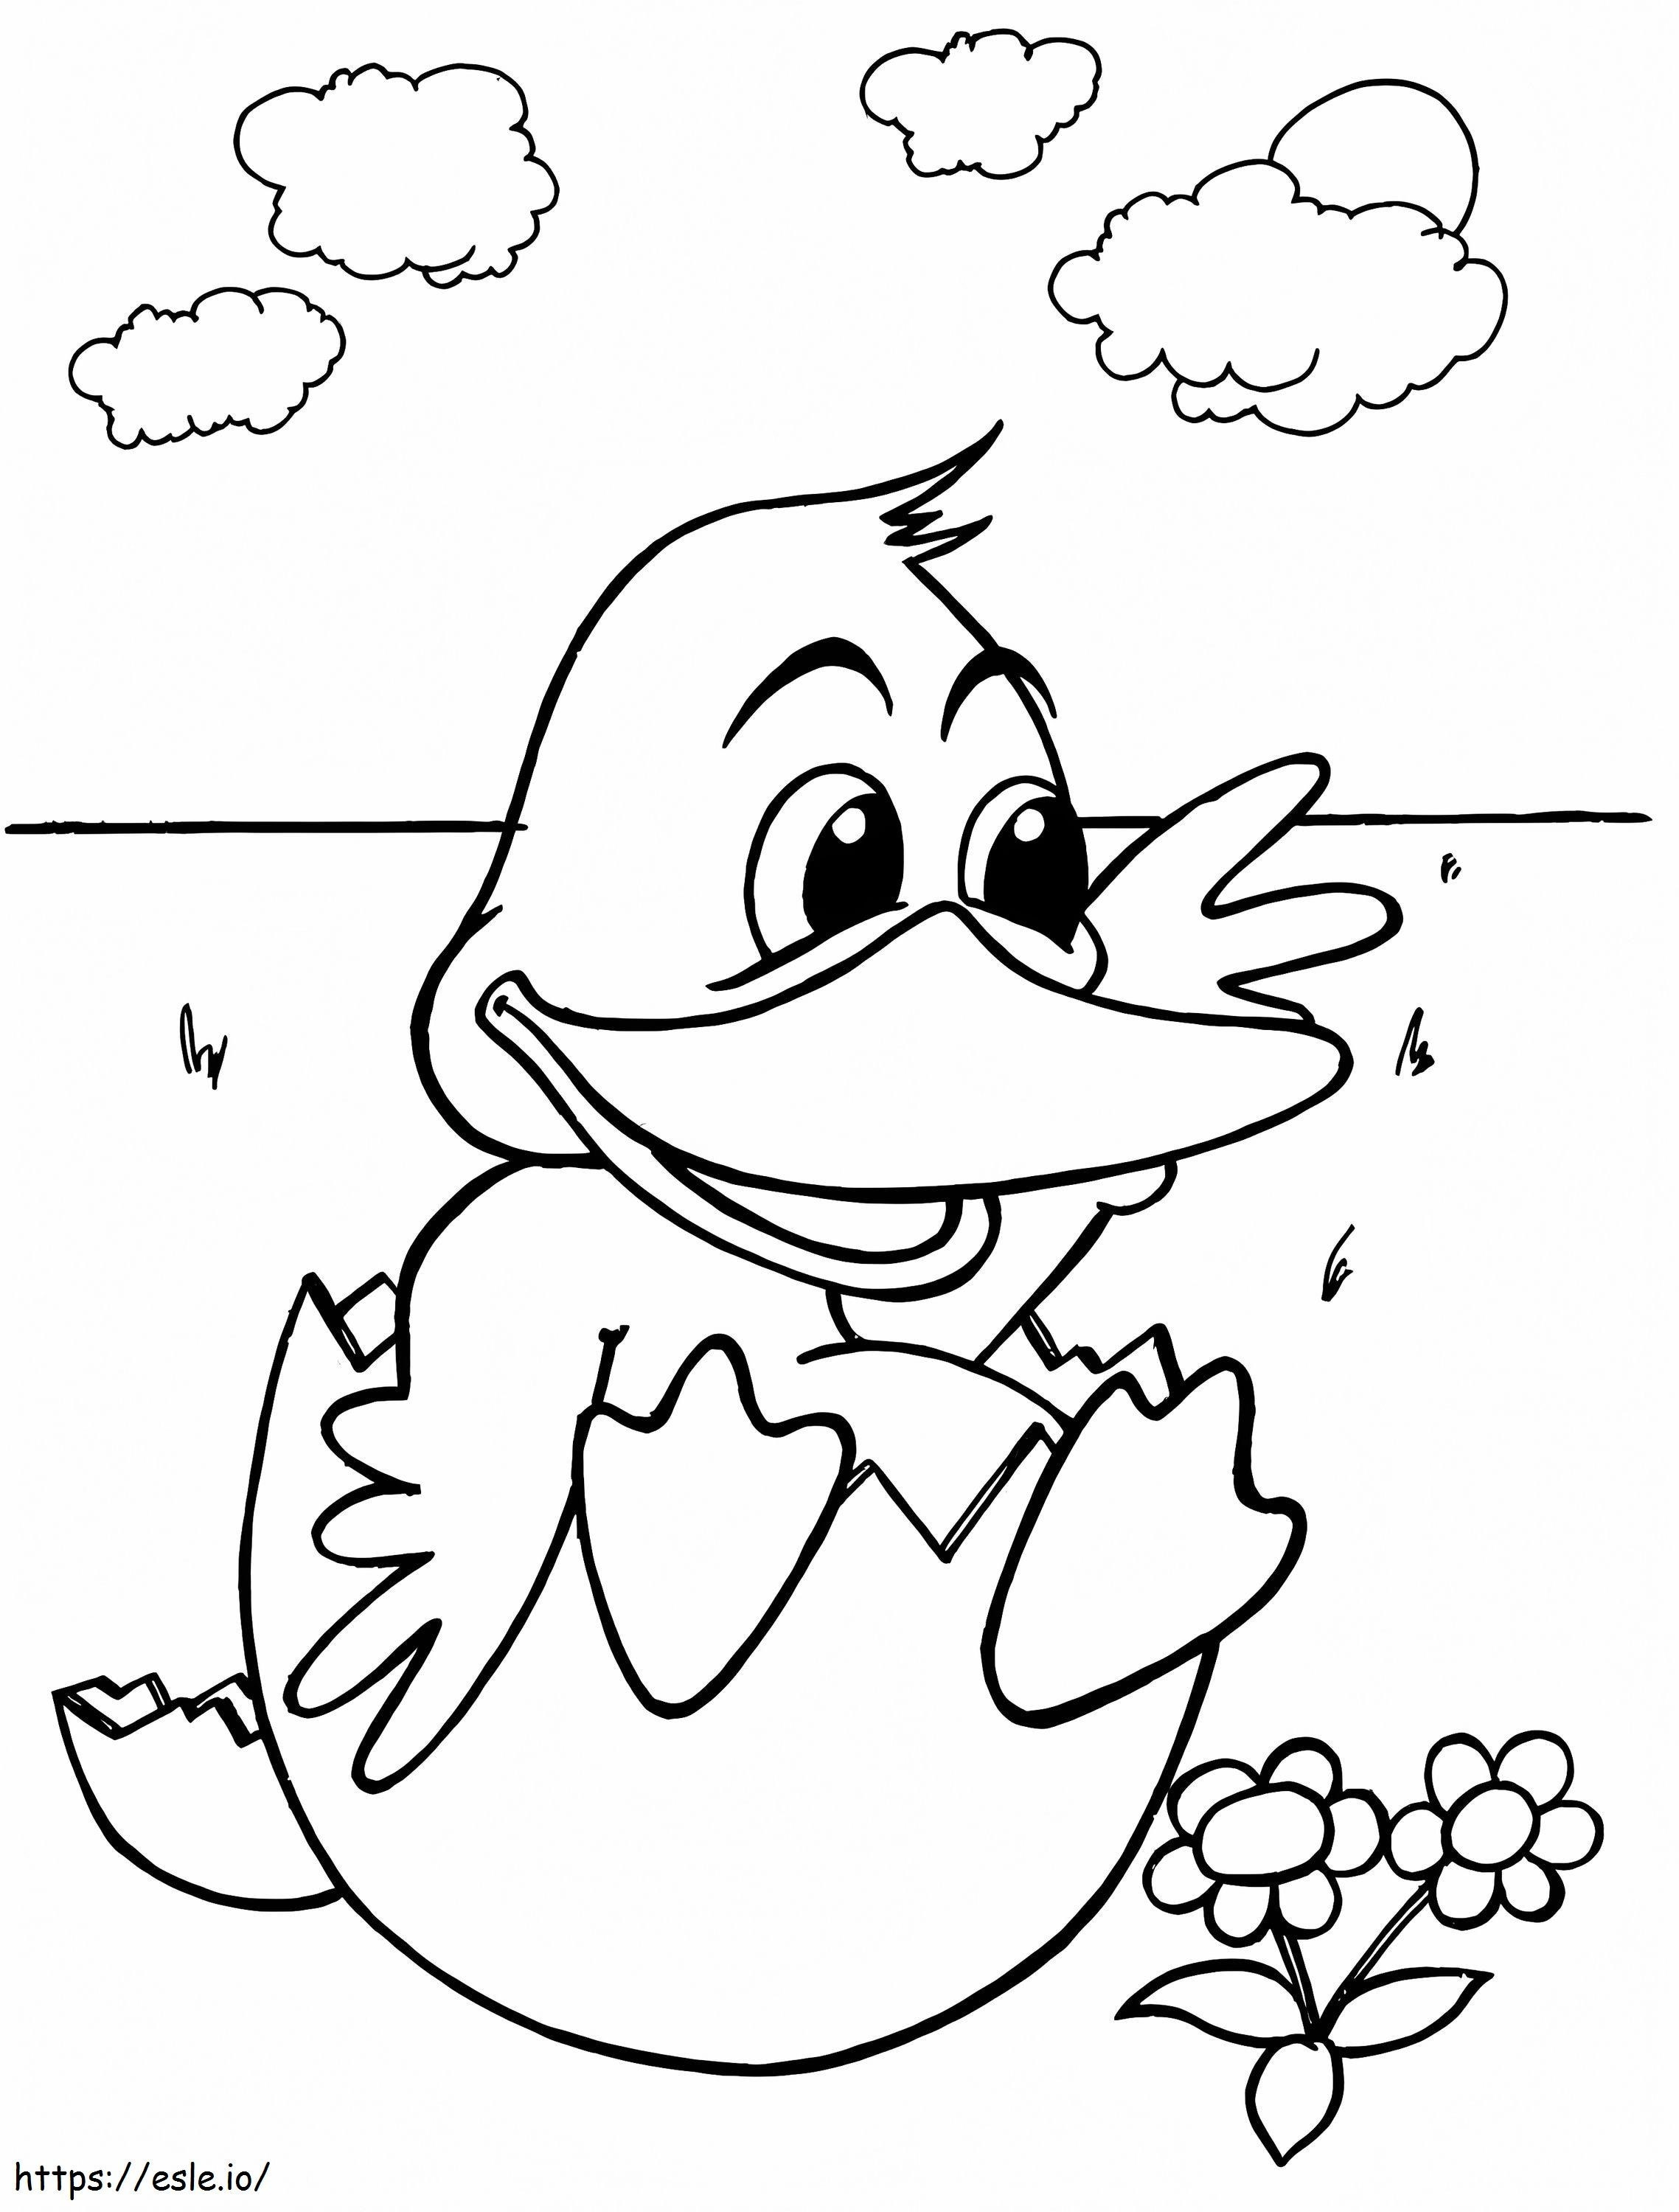 Baby Duck coloring page